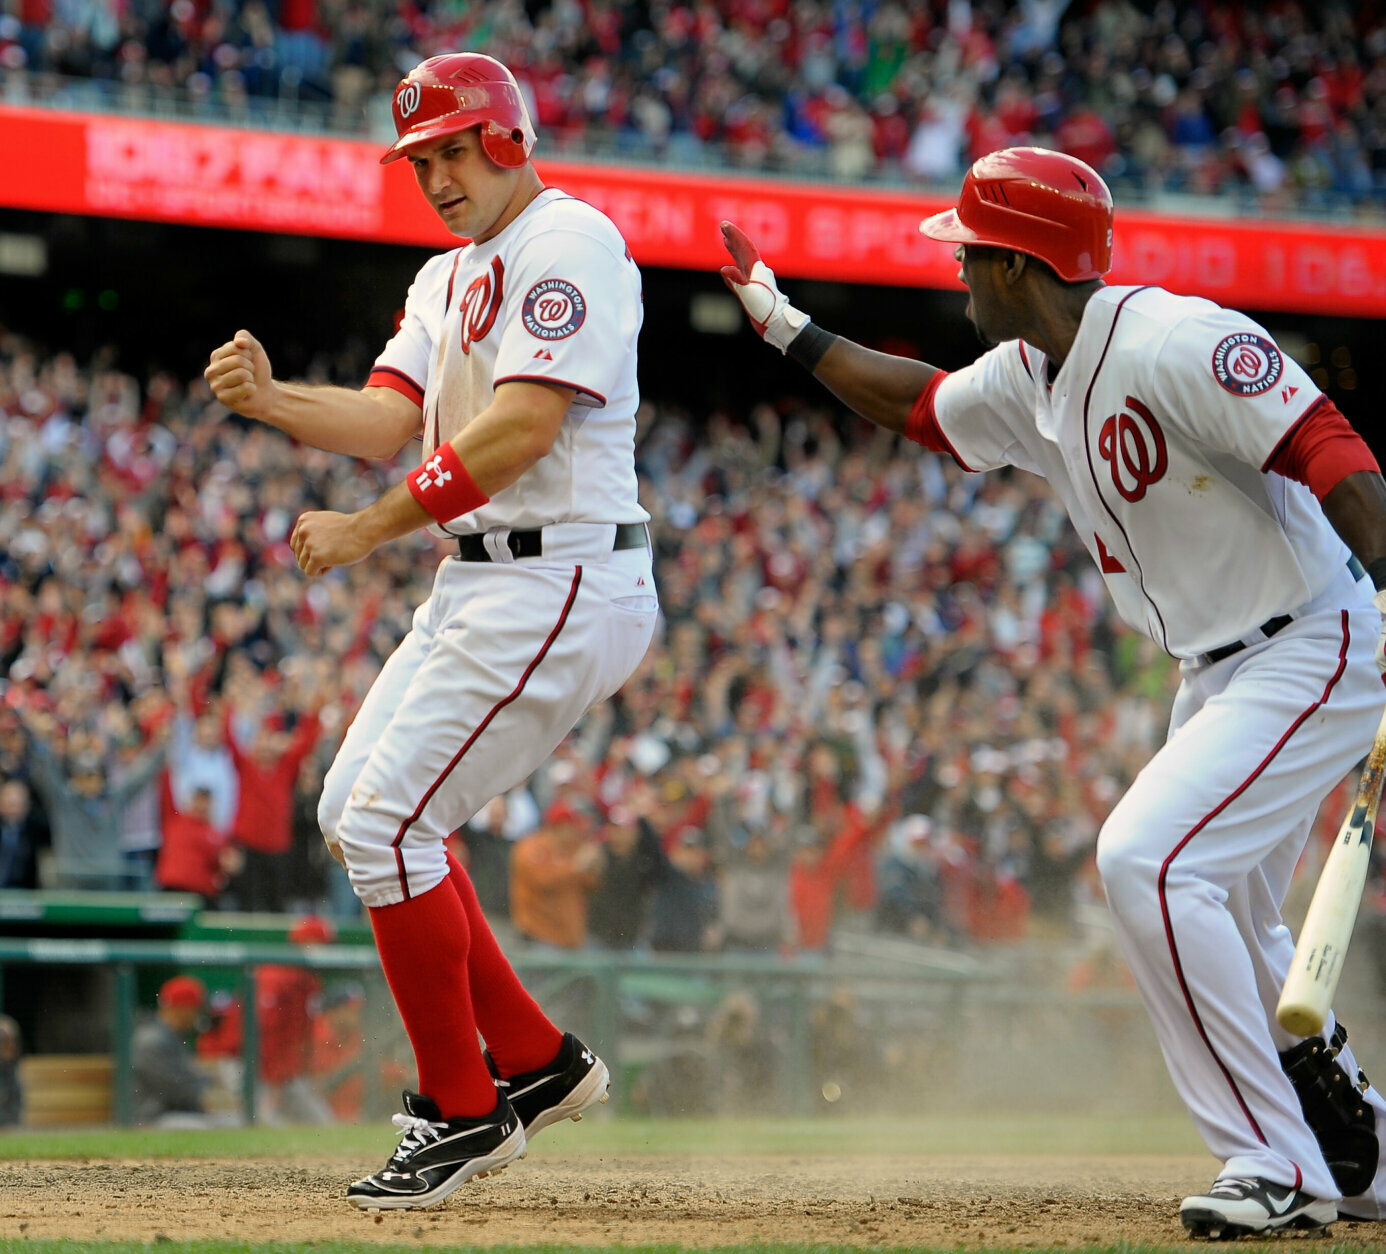 WASHINGTON DC, APRIL 12: Washington Nationals third baseman Ryan Zimmerman (11), left, celebrates after scoring the game winning run on a wild pitch in the 10th inning. Teammate Washington Nationals center fielder Roger Bernadina (2), right, was at bat during the Washington Nationals defeat of the Cincinnati Reds 3 - 2 going ten innings in their 2012 home opener at Nationals Stadium in Washington DC April 12, 2012 (Photo by John McDonnell/The Washington Post via Getty Images)